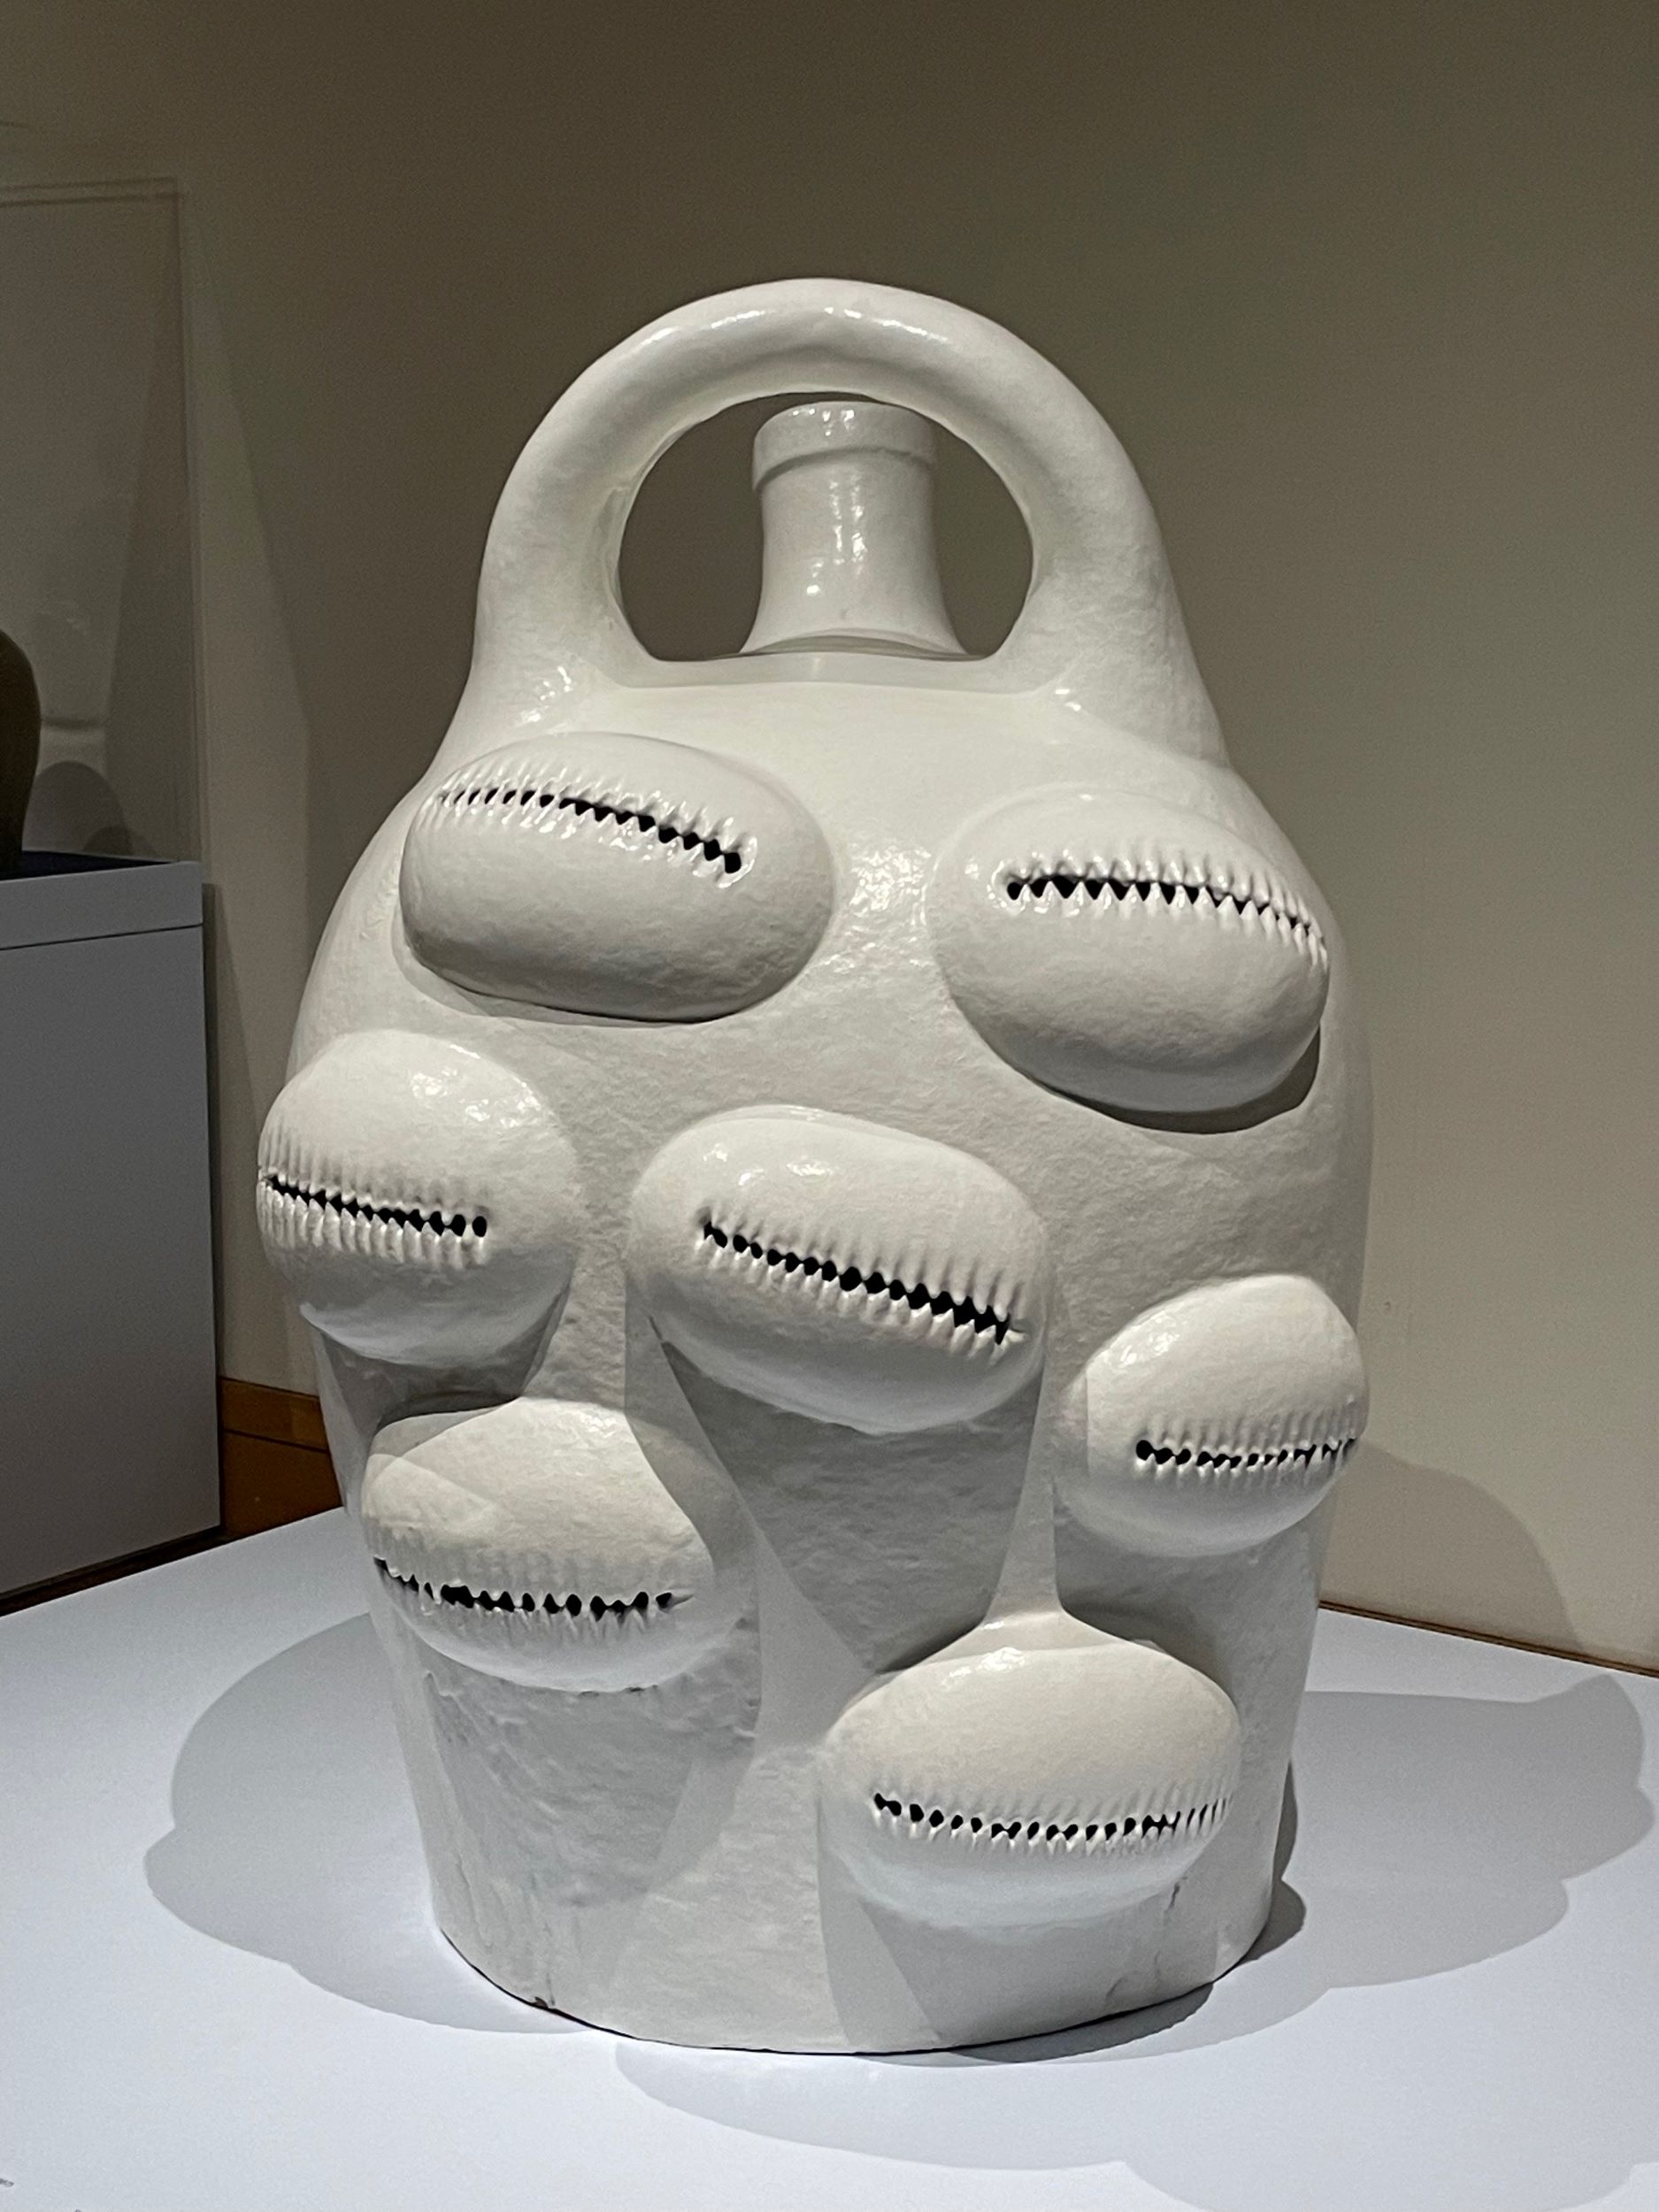 A white-glazed ceramic vessel with a handle and spout. Seven large shapes that resemble cowrie shells are embedded on the form.